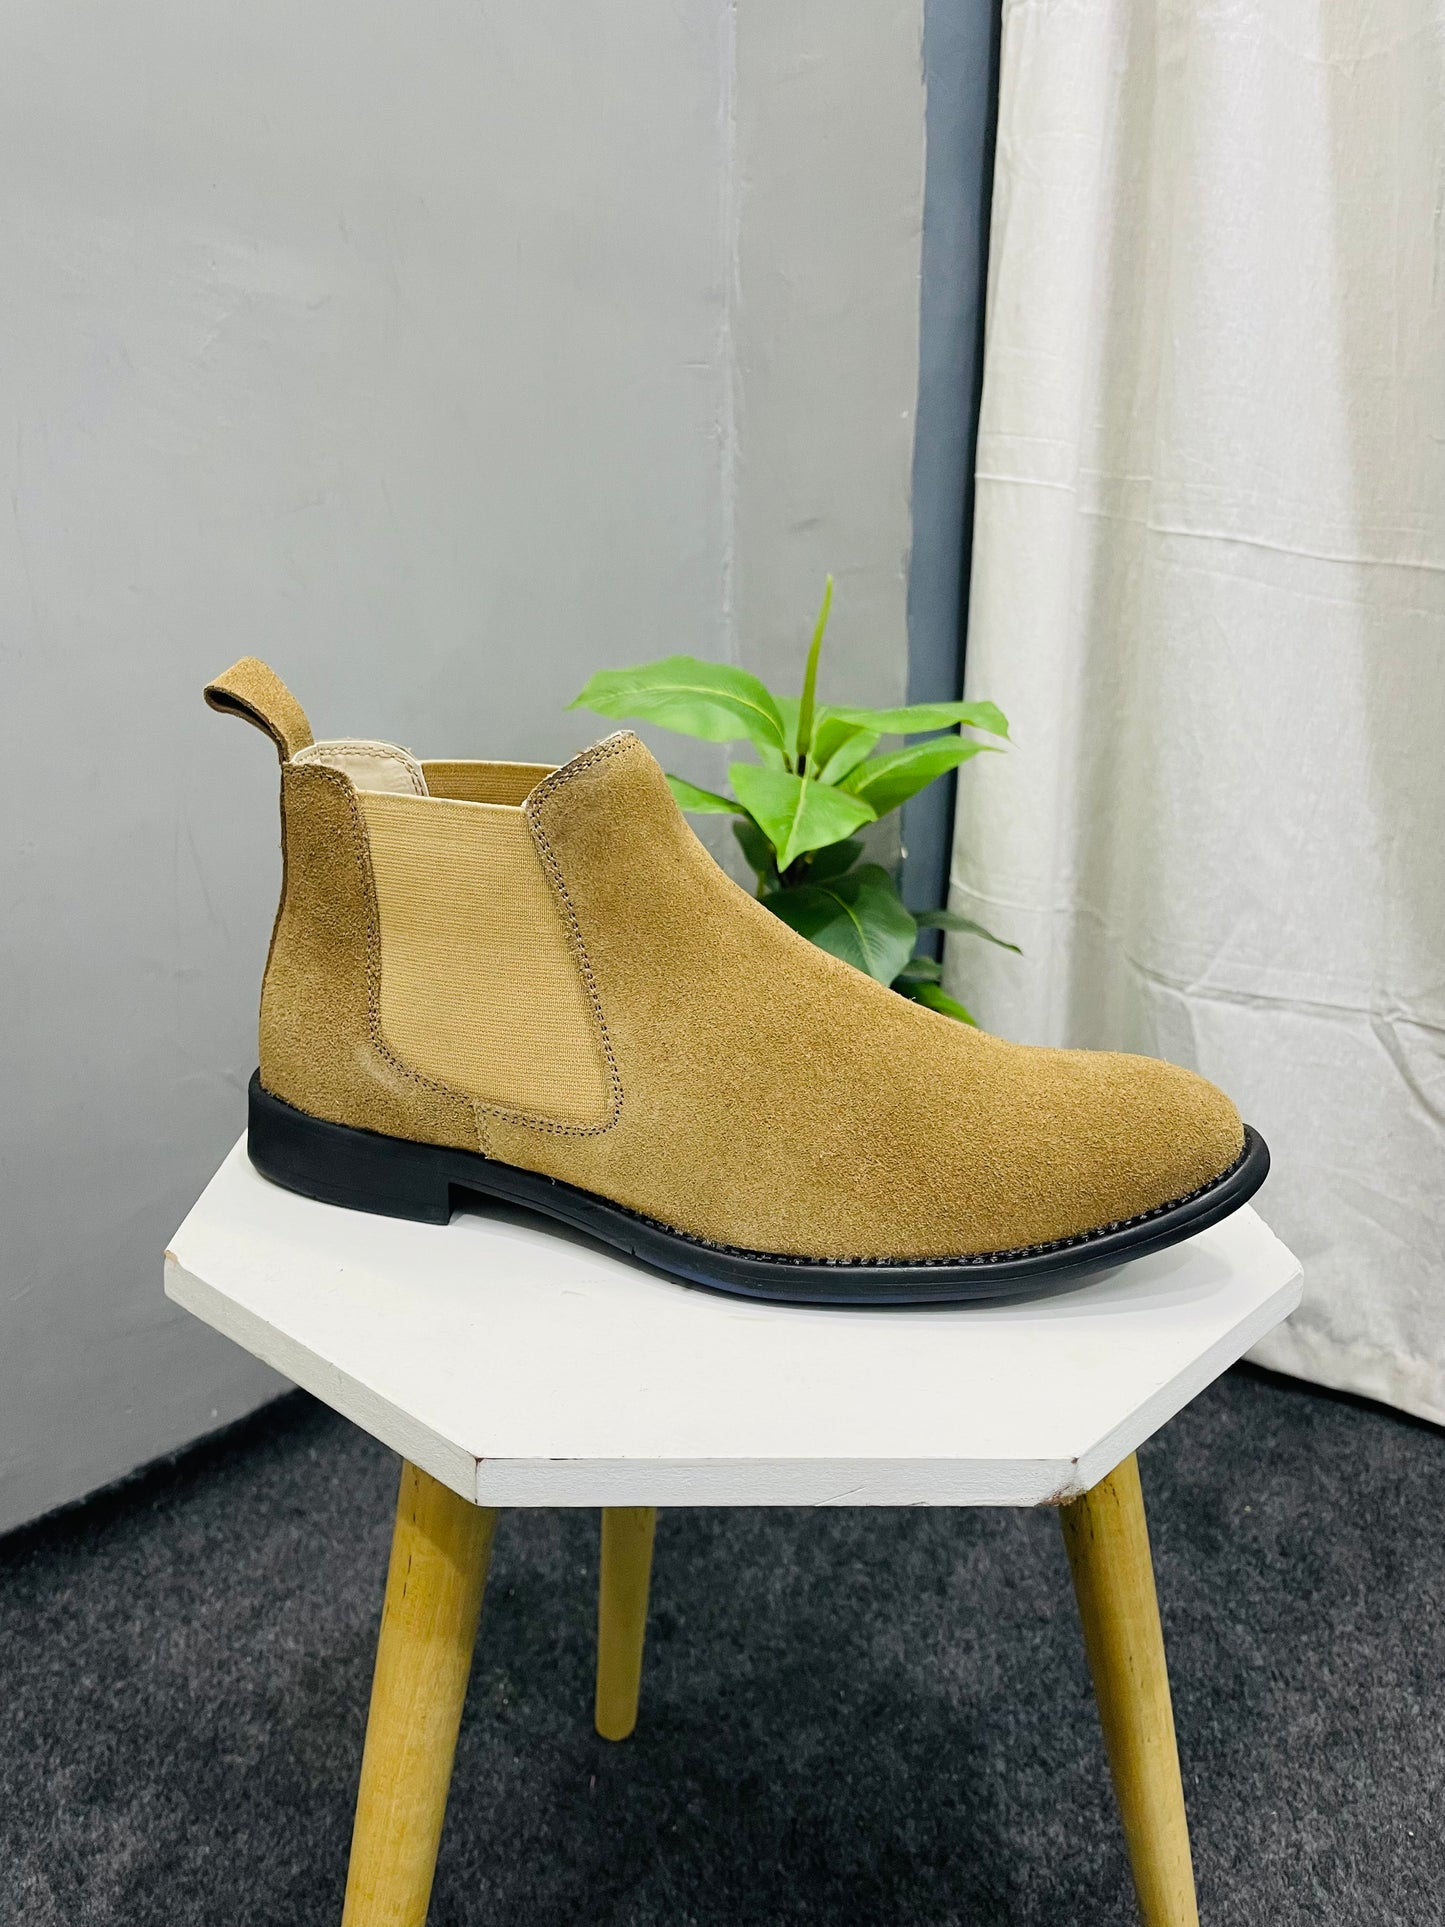 Men's Stylish Slip-On Suede Chelsea Ankle Boots for Casual Fall & Spring Wear - Comfortable, Durable TPR Sole, Cushioned Insole & Elastic Band